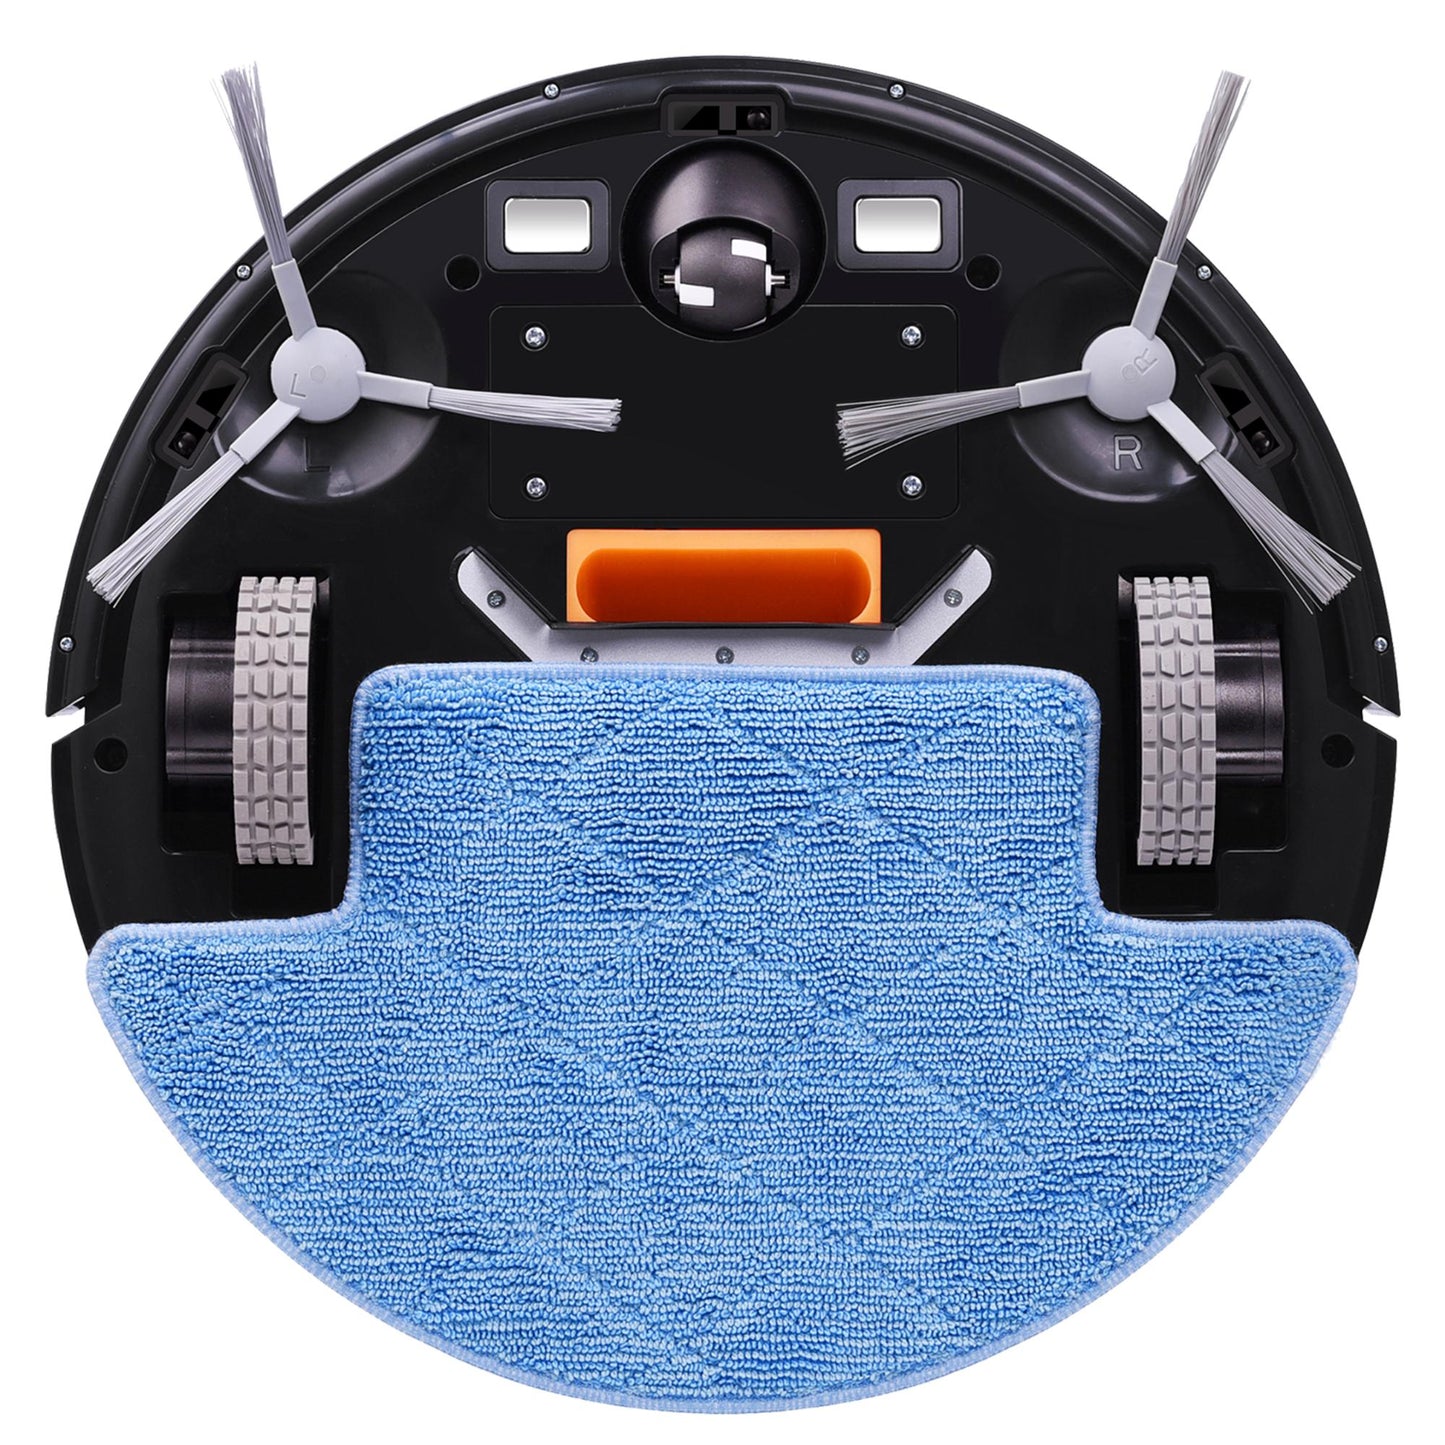 LIECTROUX V3S Pro Modern automated vacuum cleaner maintaining spotless floors. | Blue Chilli Electronics.